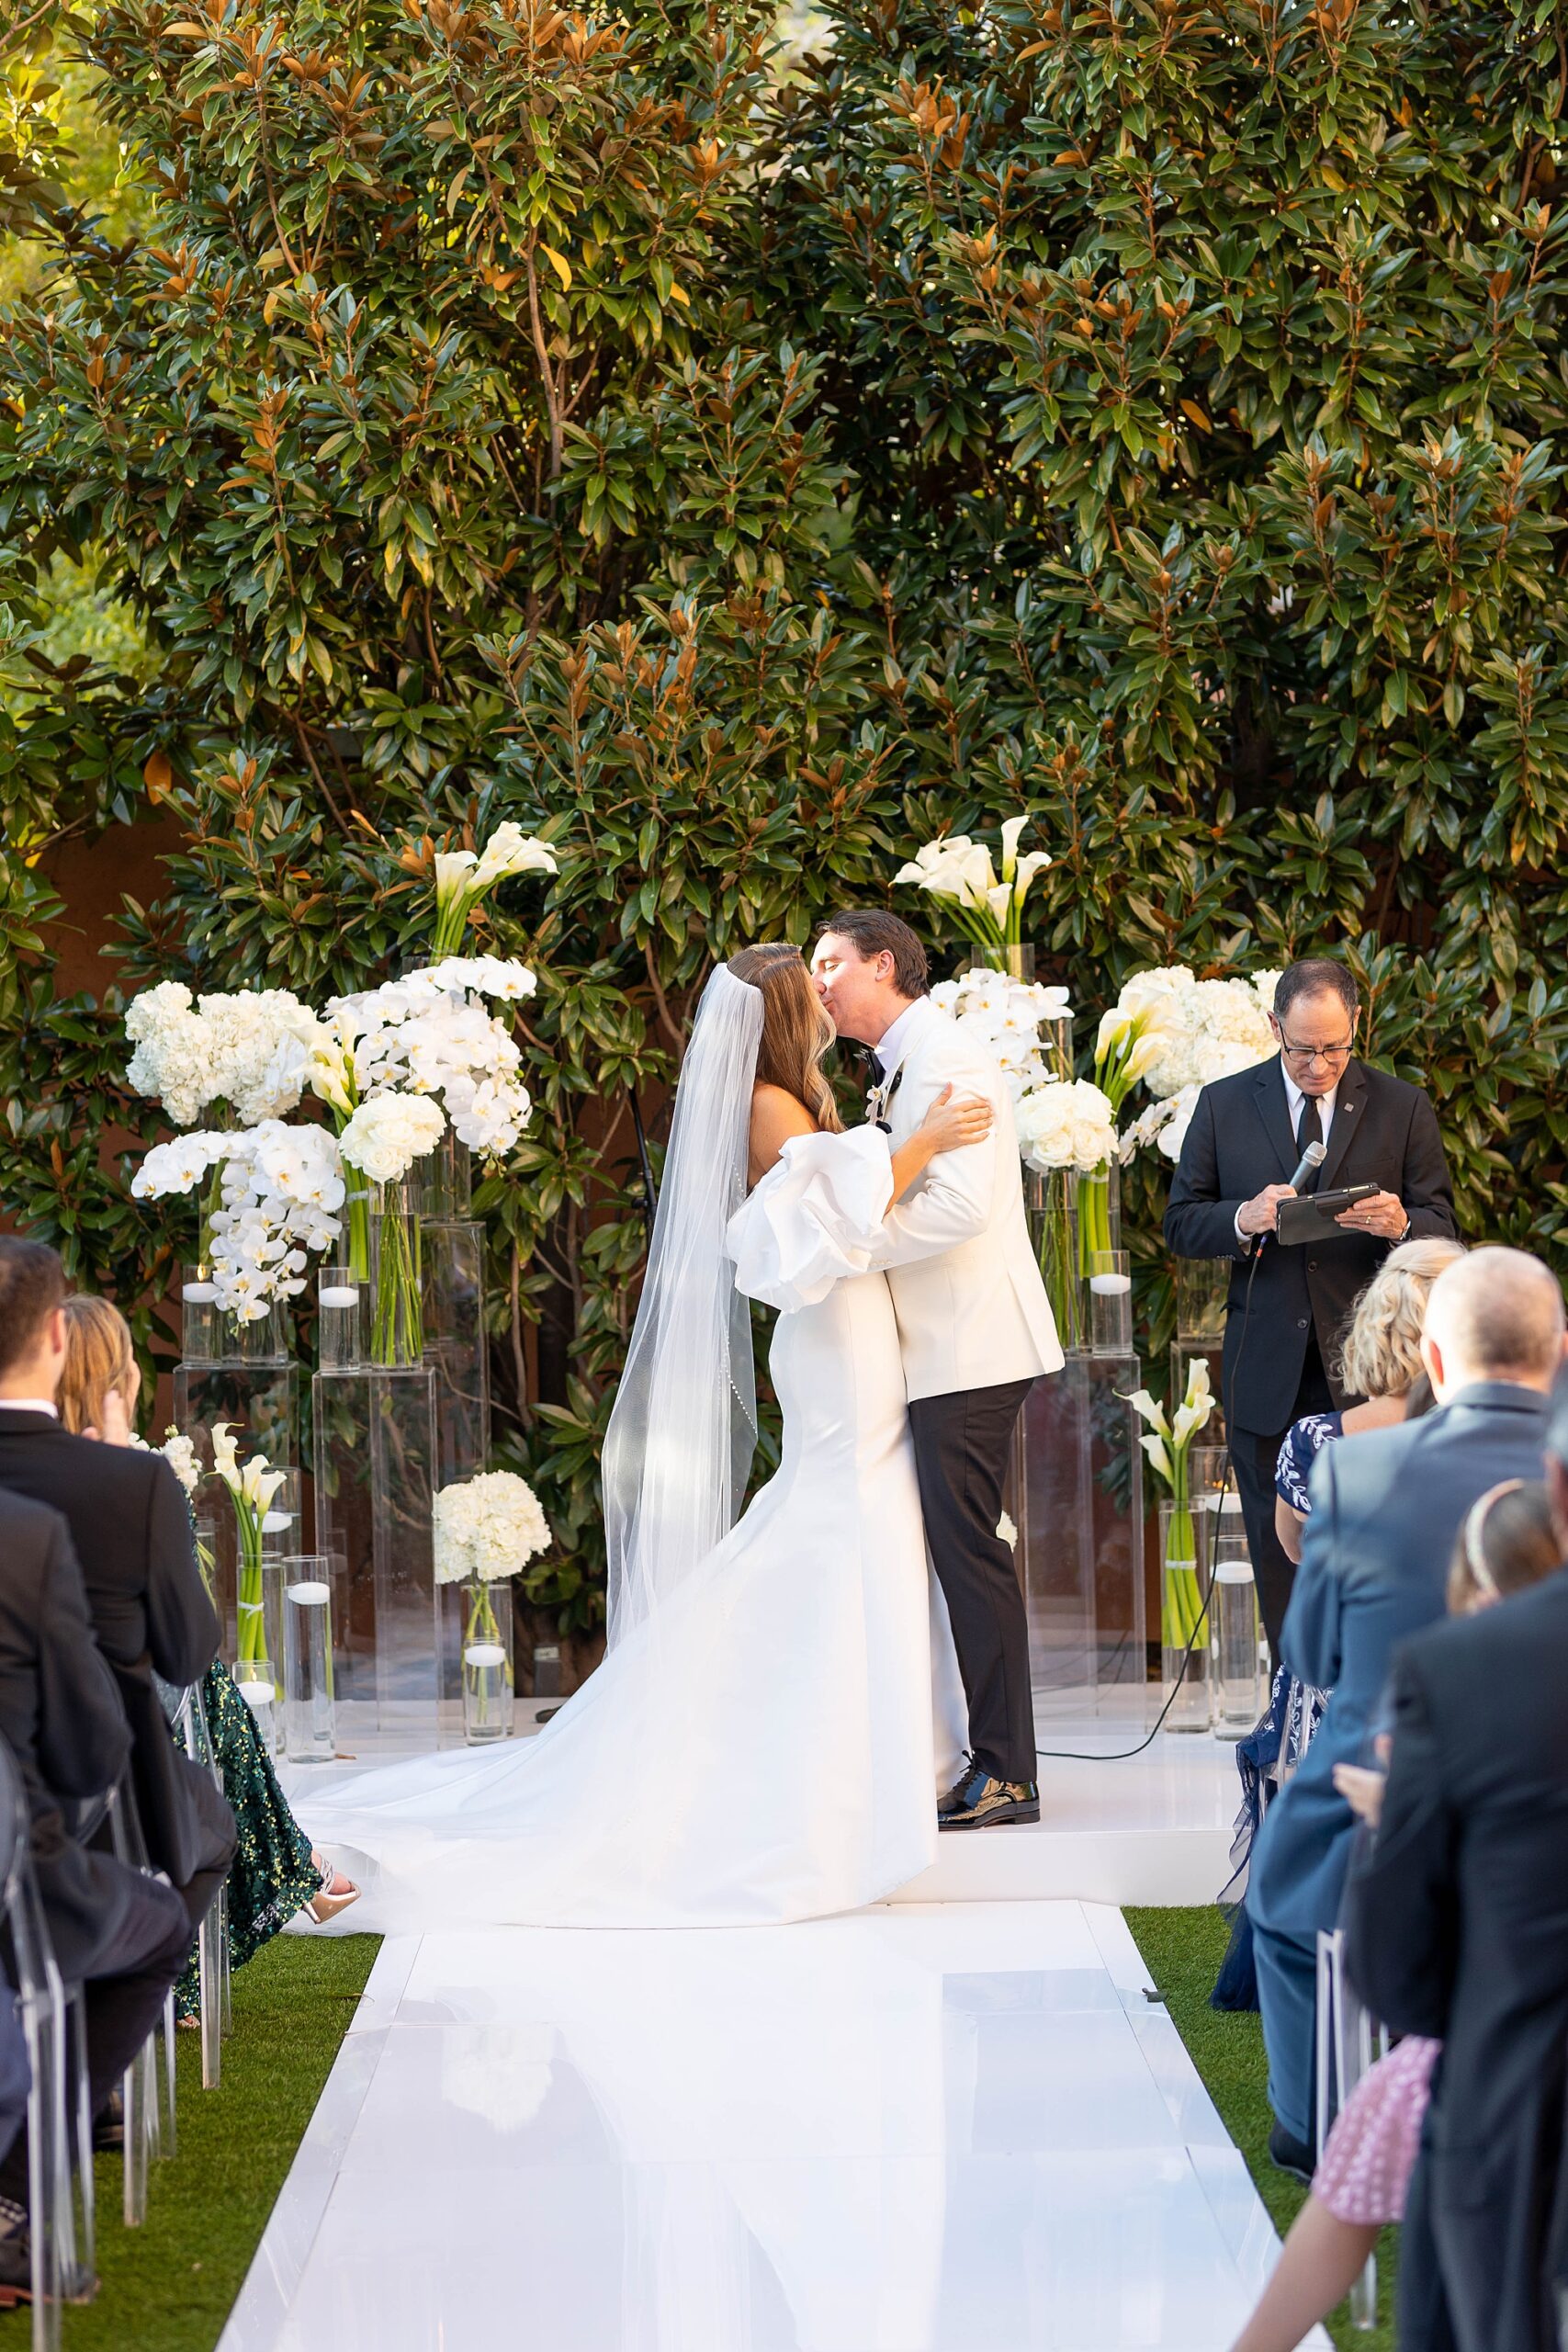 newlyweds kiss at end of the aisle on lawn at Rosewood Mansion